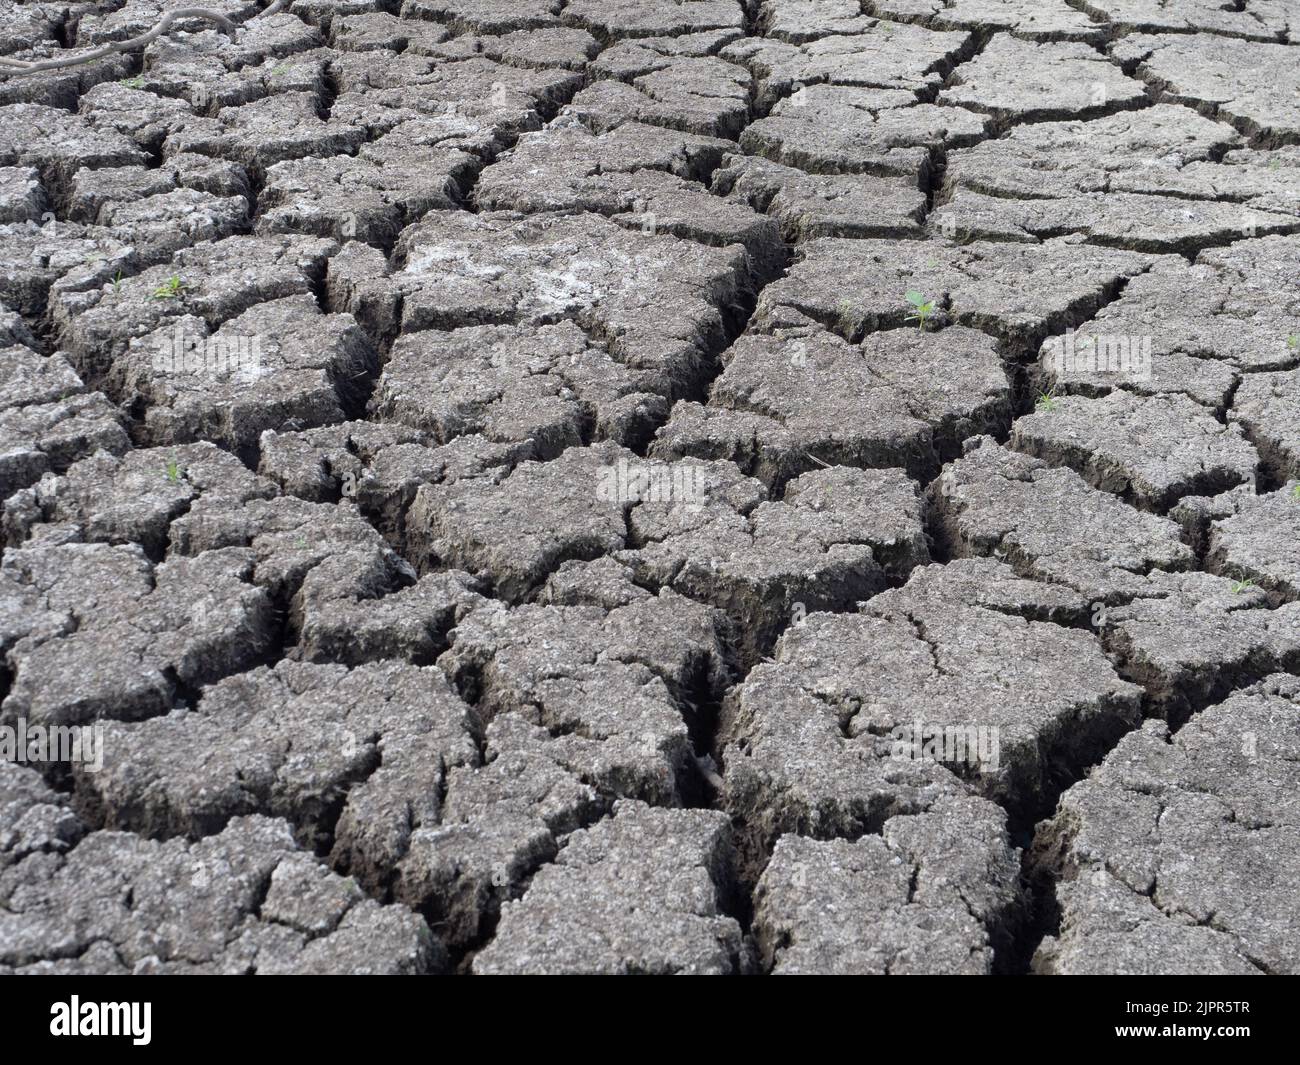 Deep clefts in parched, dried lake bed with a few sprigs of vegetation sprouting in fissures. Stock Photo